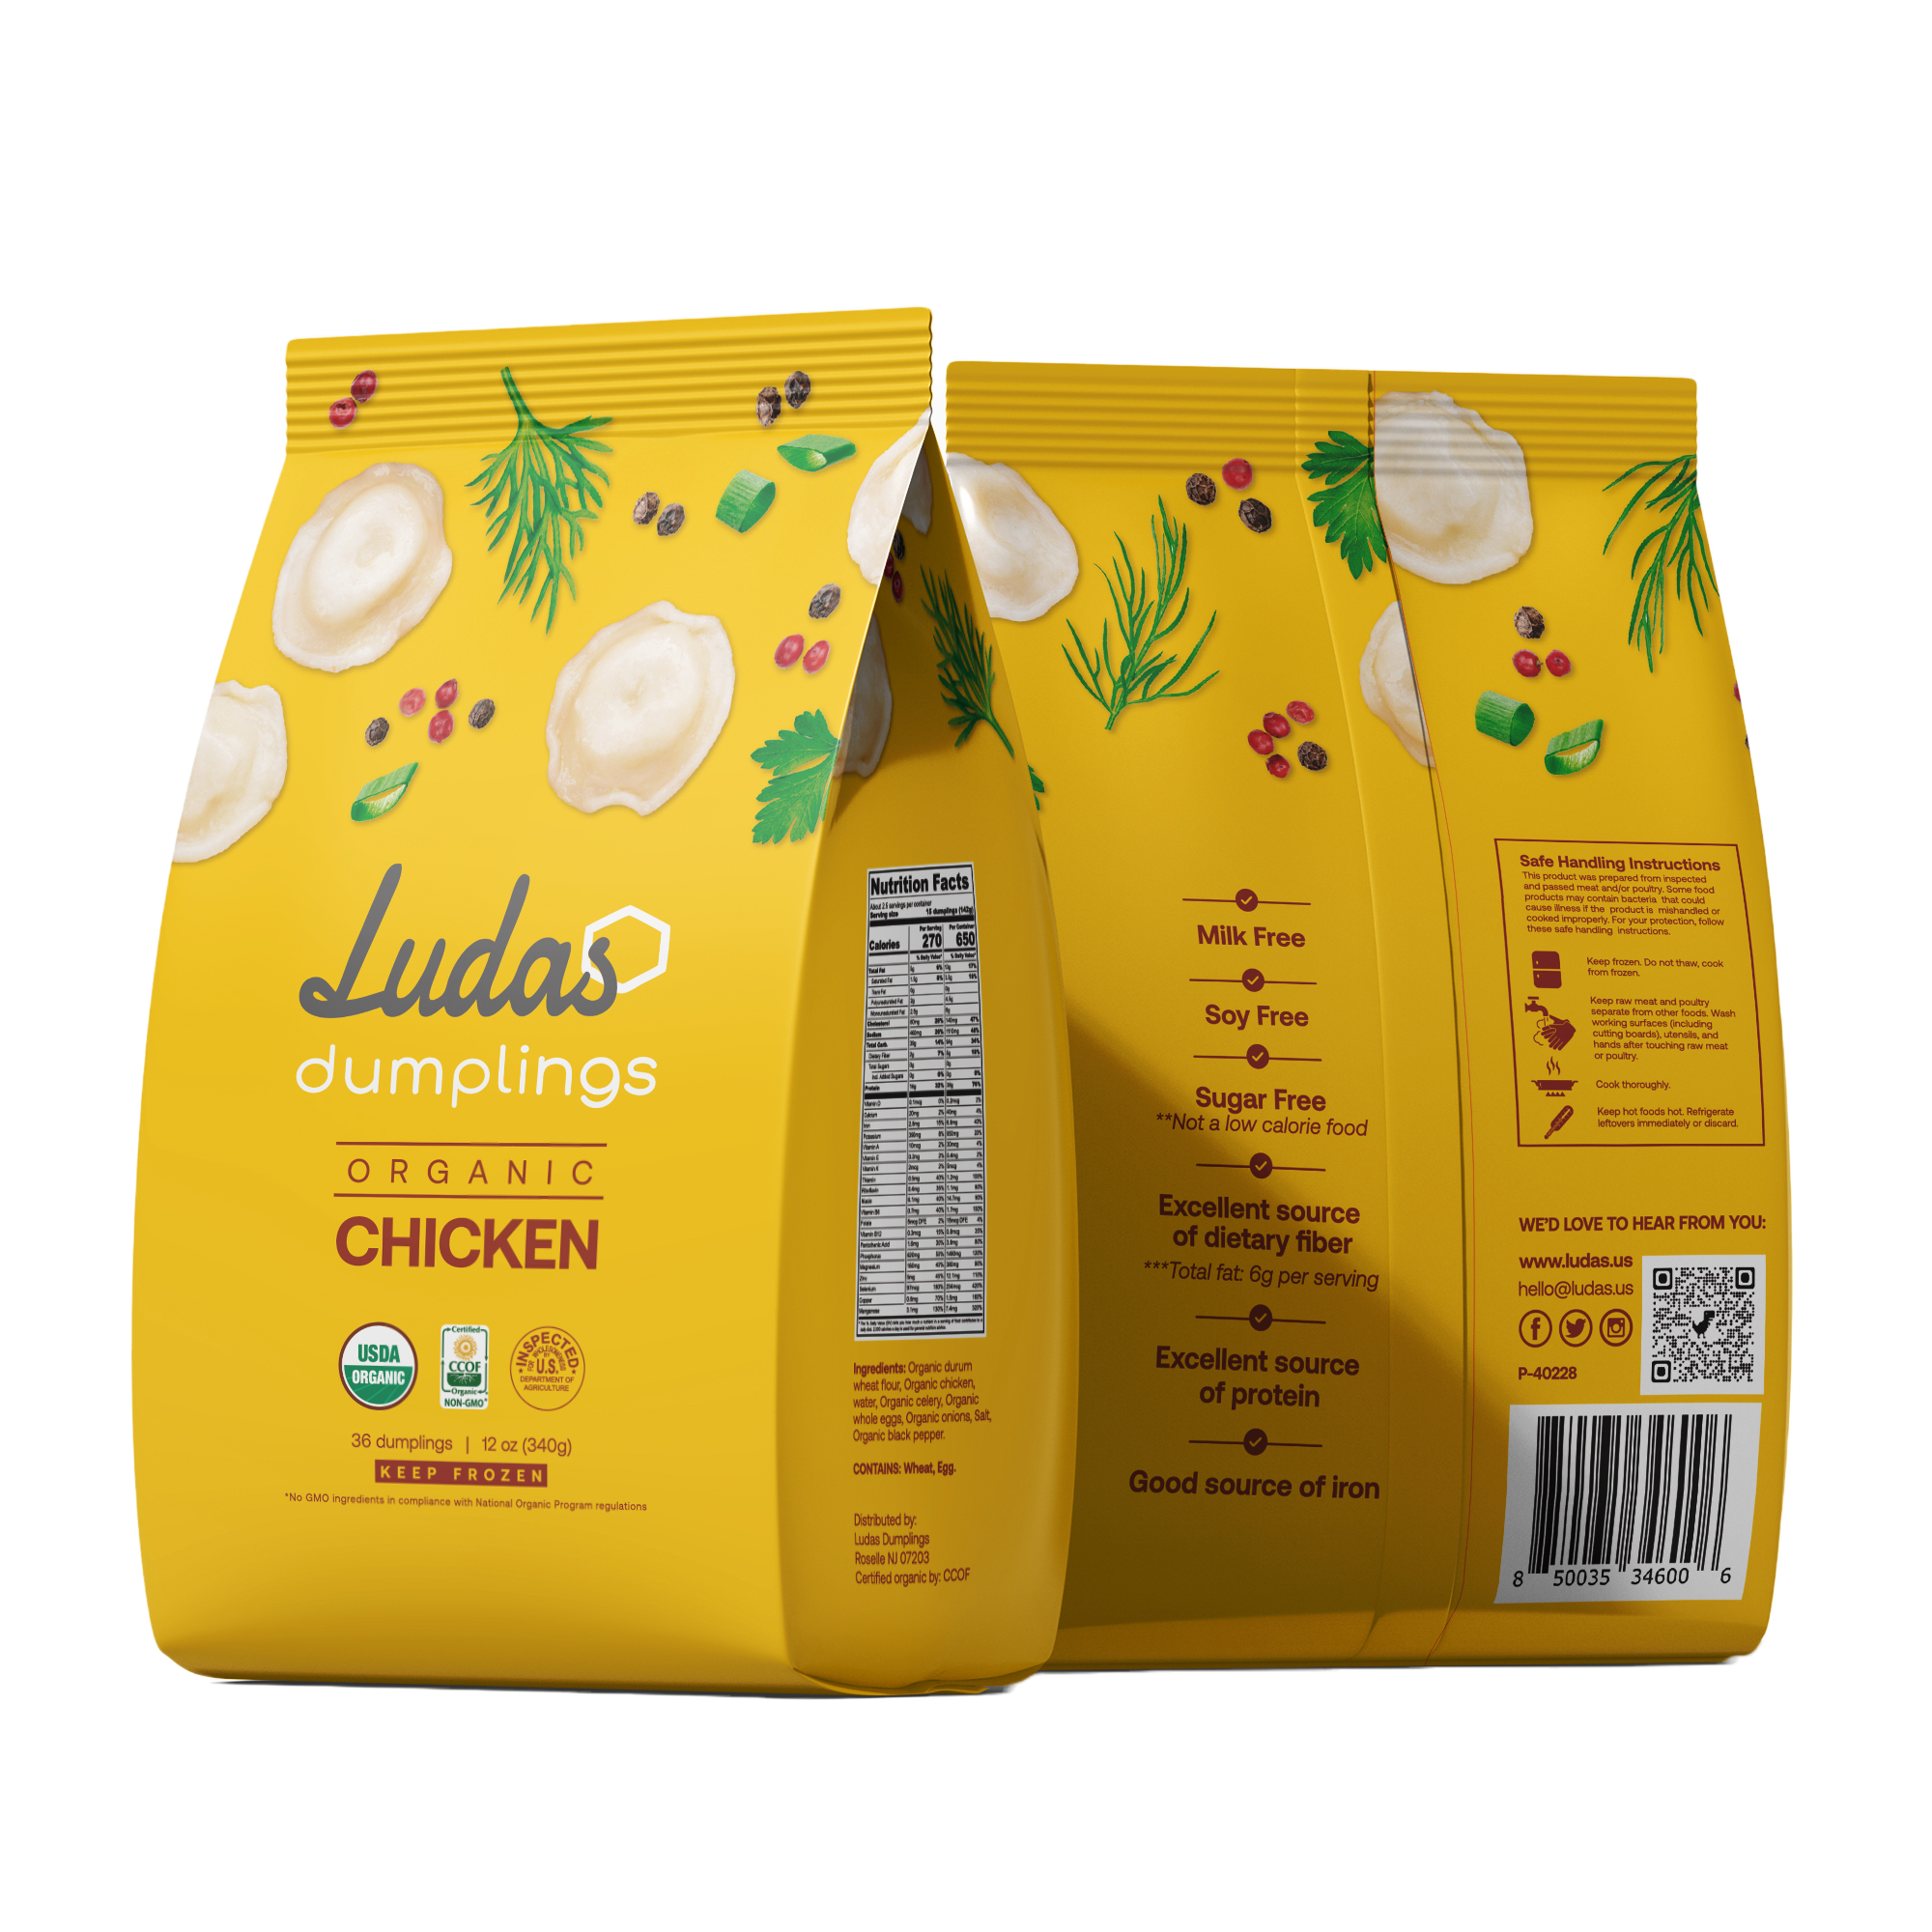 Luda's Dumplings - Mix of 100% organic Chick'N breast and Loaded potato # dumplings with sour cream and dillsometimes #lessismore other times  #moreisless #ludasdumplings #customizable #dumplingsreimagined